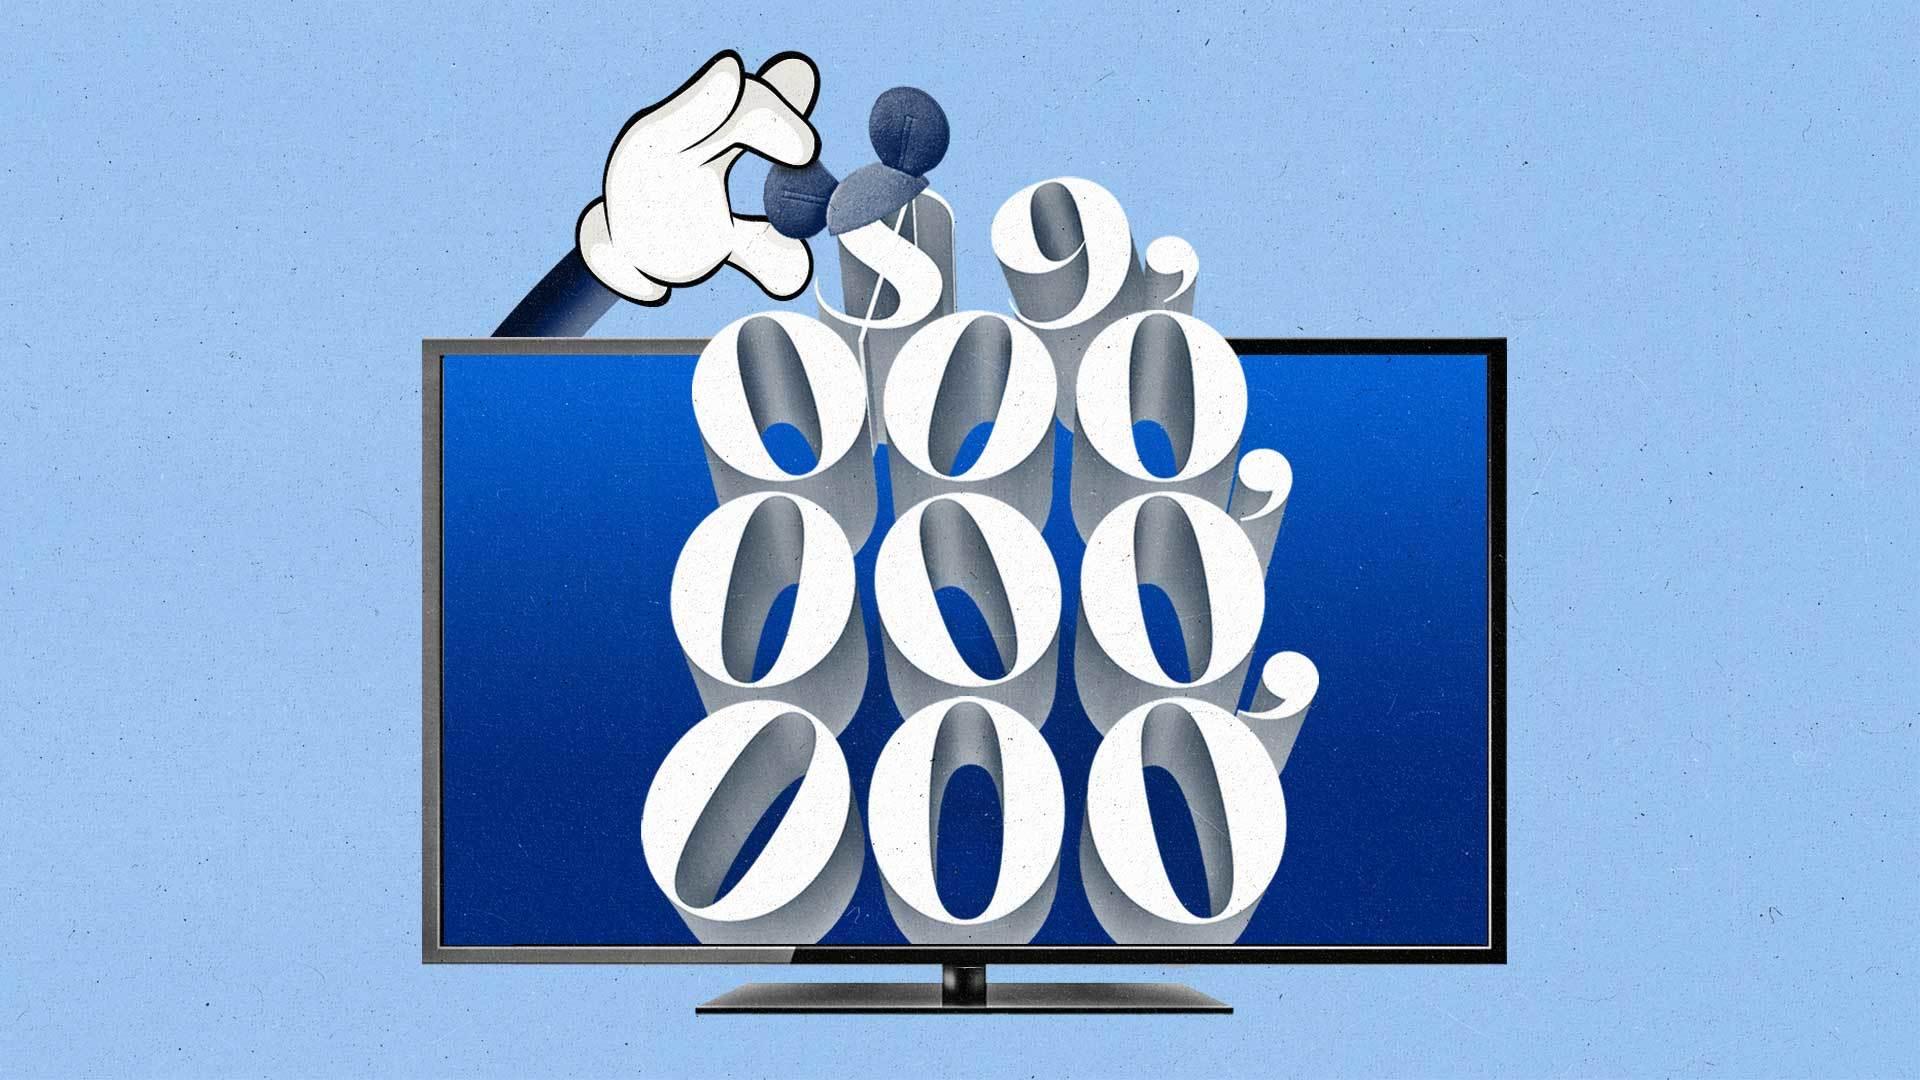 TV with the numbers $9,000,000,000 stacked on the scren and a Mickey Mouse hand placing ears on the number.